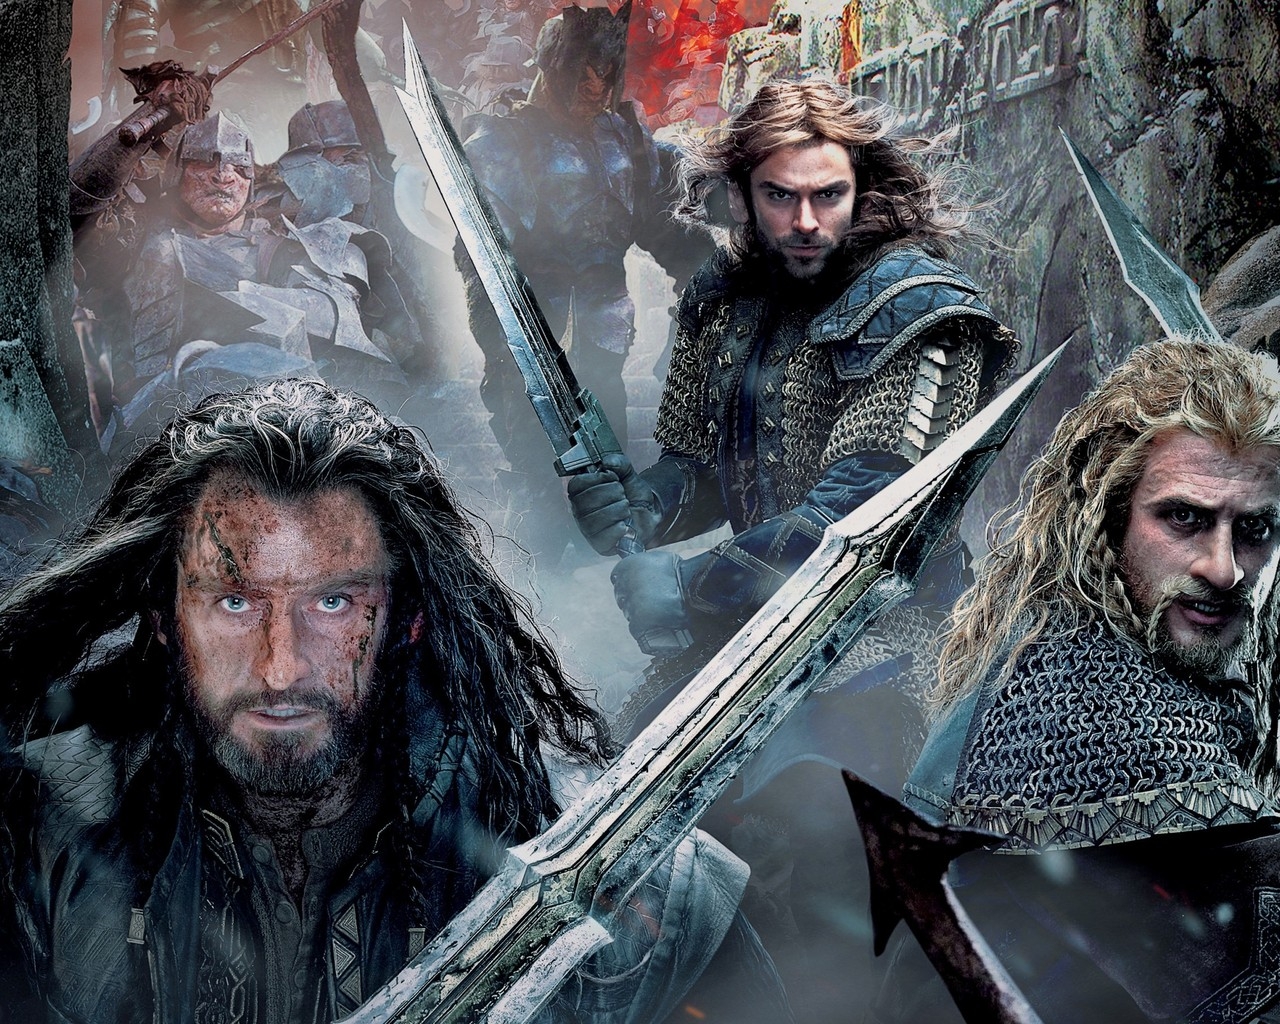 The Hobbit The Battle of the Five Armies Poster for 1280 x 1024 resolution